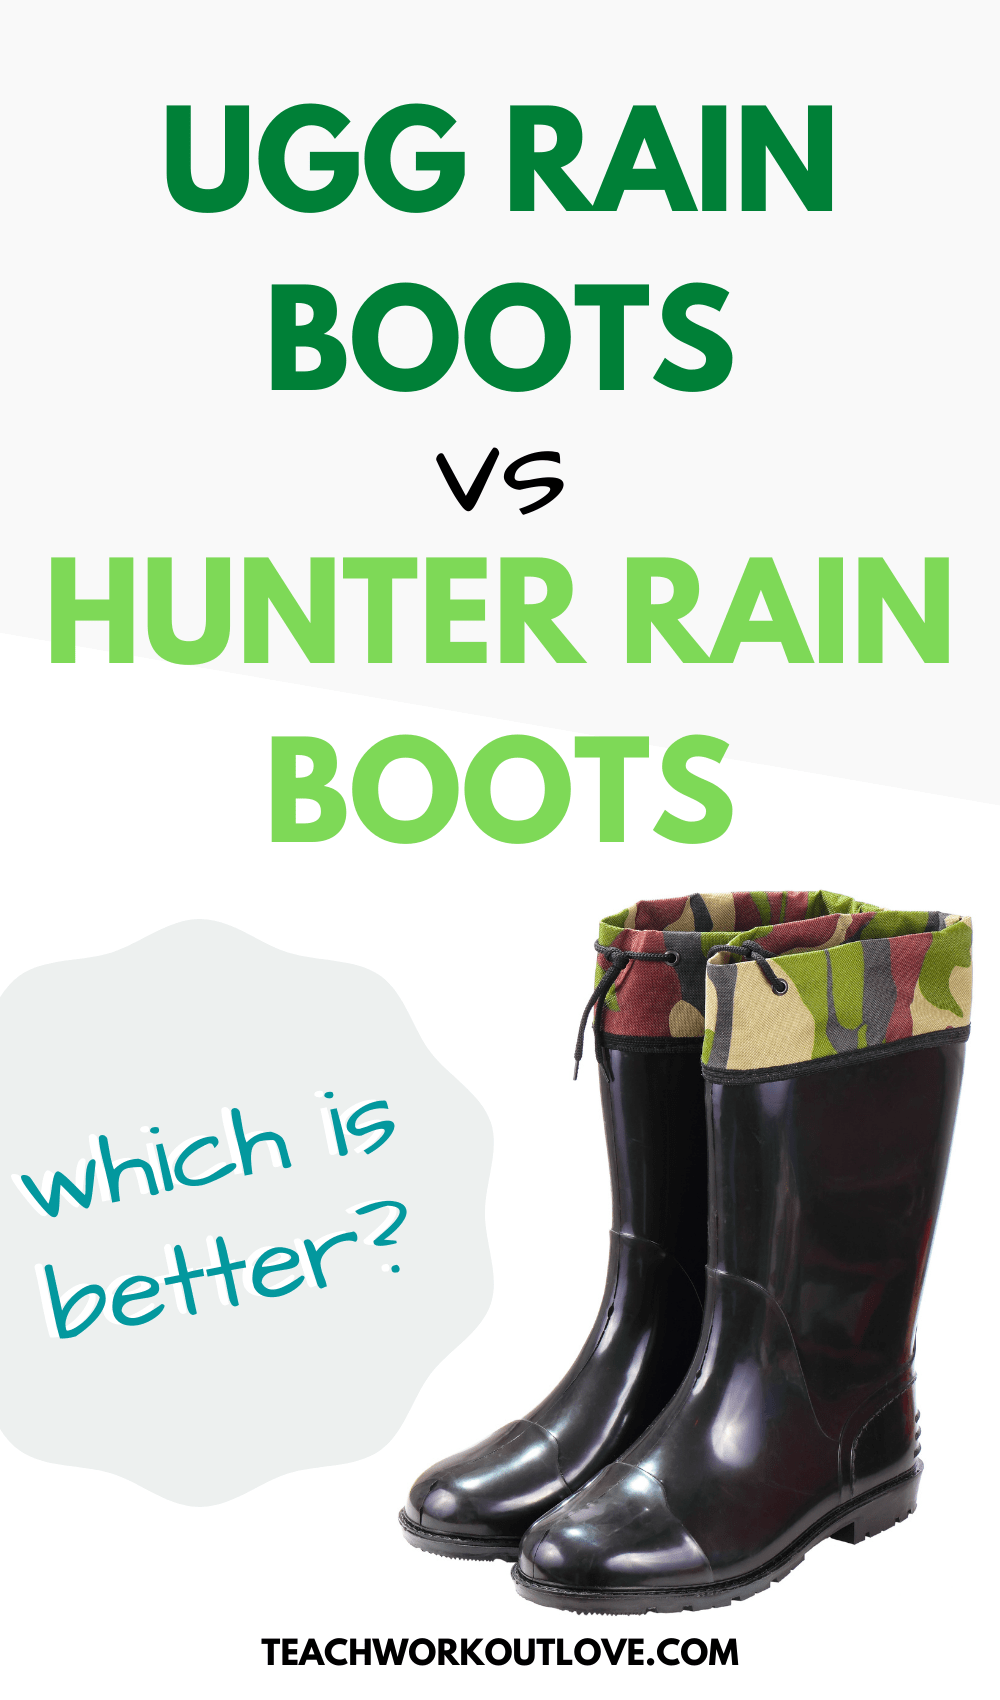 Hunter Boots have been a favorite item in many mom's closets. But UGG Rain Boots are a great replacement.This article will compare the two rain boots.